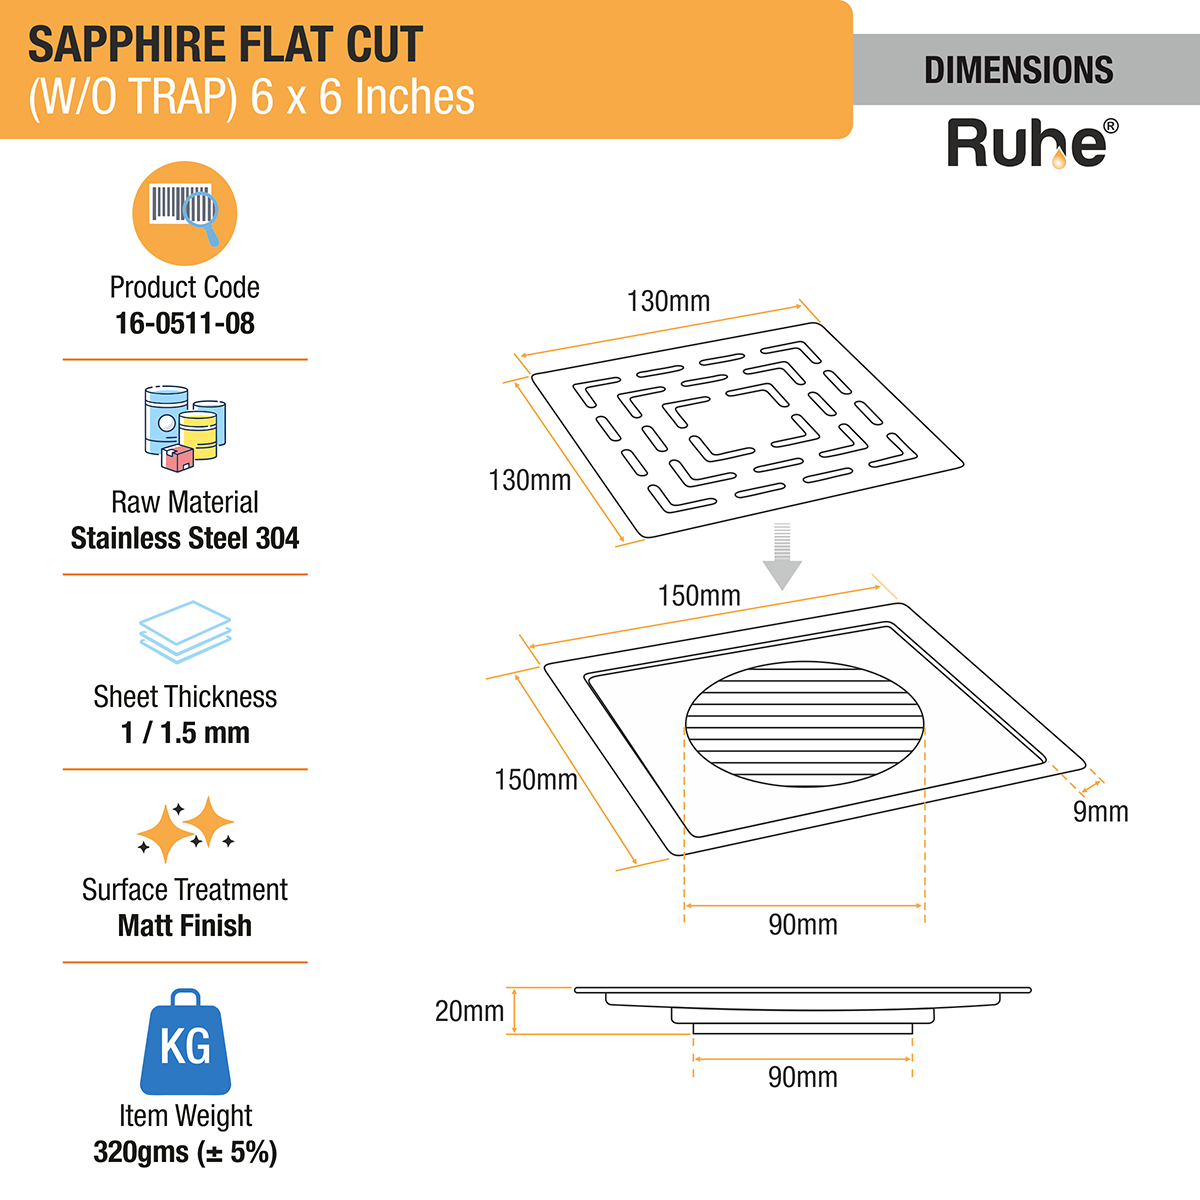 Sapphire Square Flat Cut 304-Grade Floor Drain (6 x 6 Inches) dimensions and sizes